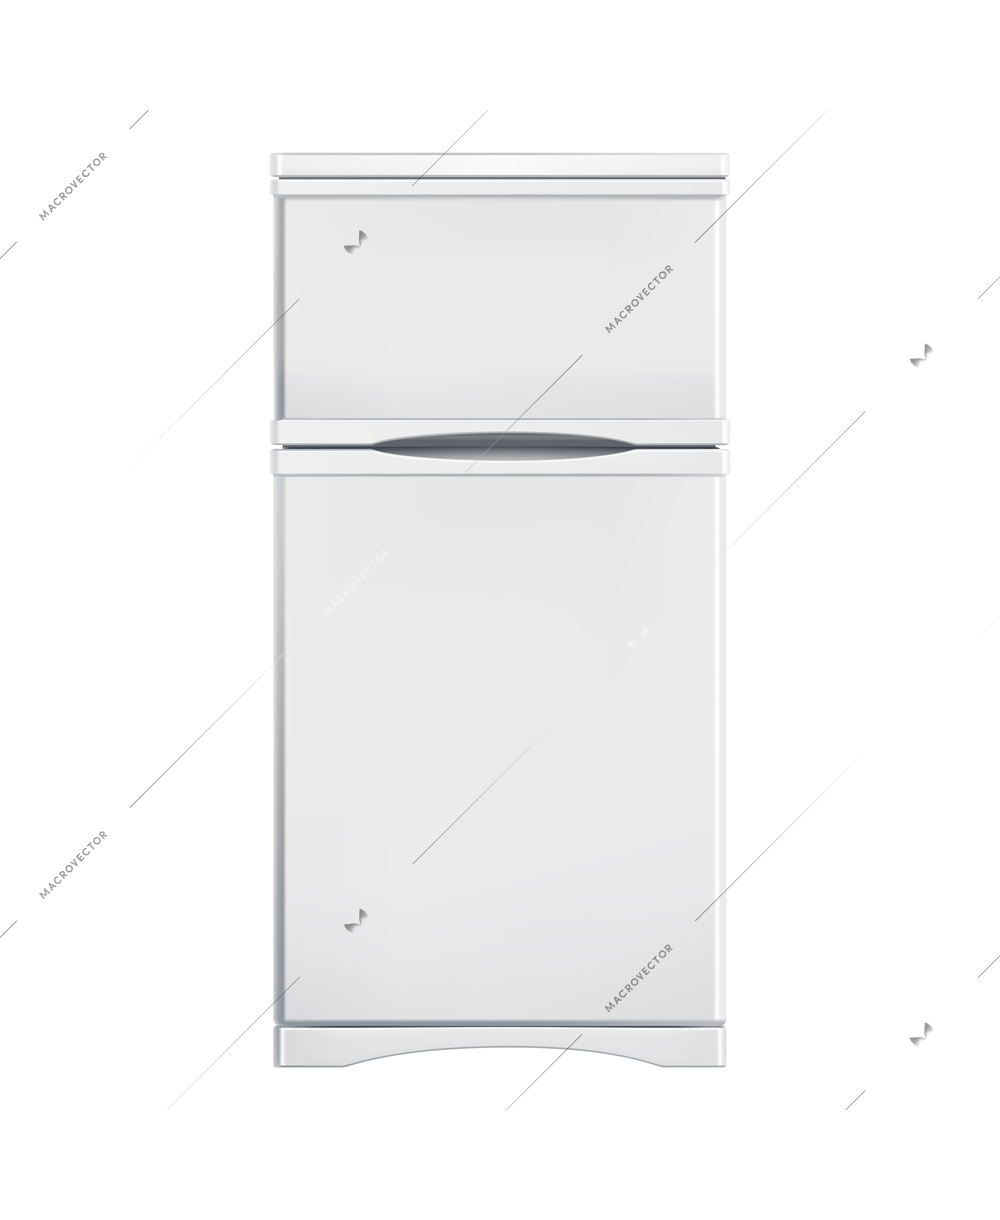 Realistic top freezer fridge front view on white background vector illustration